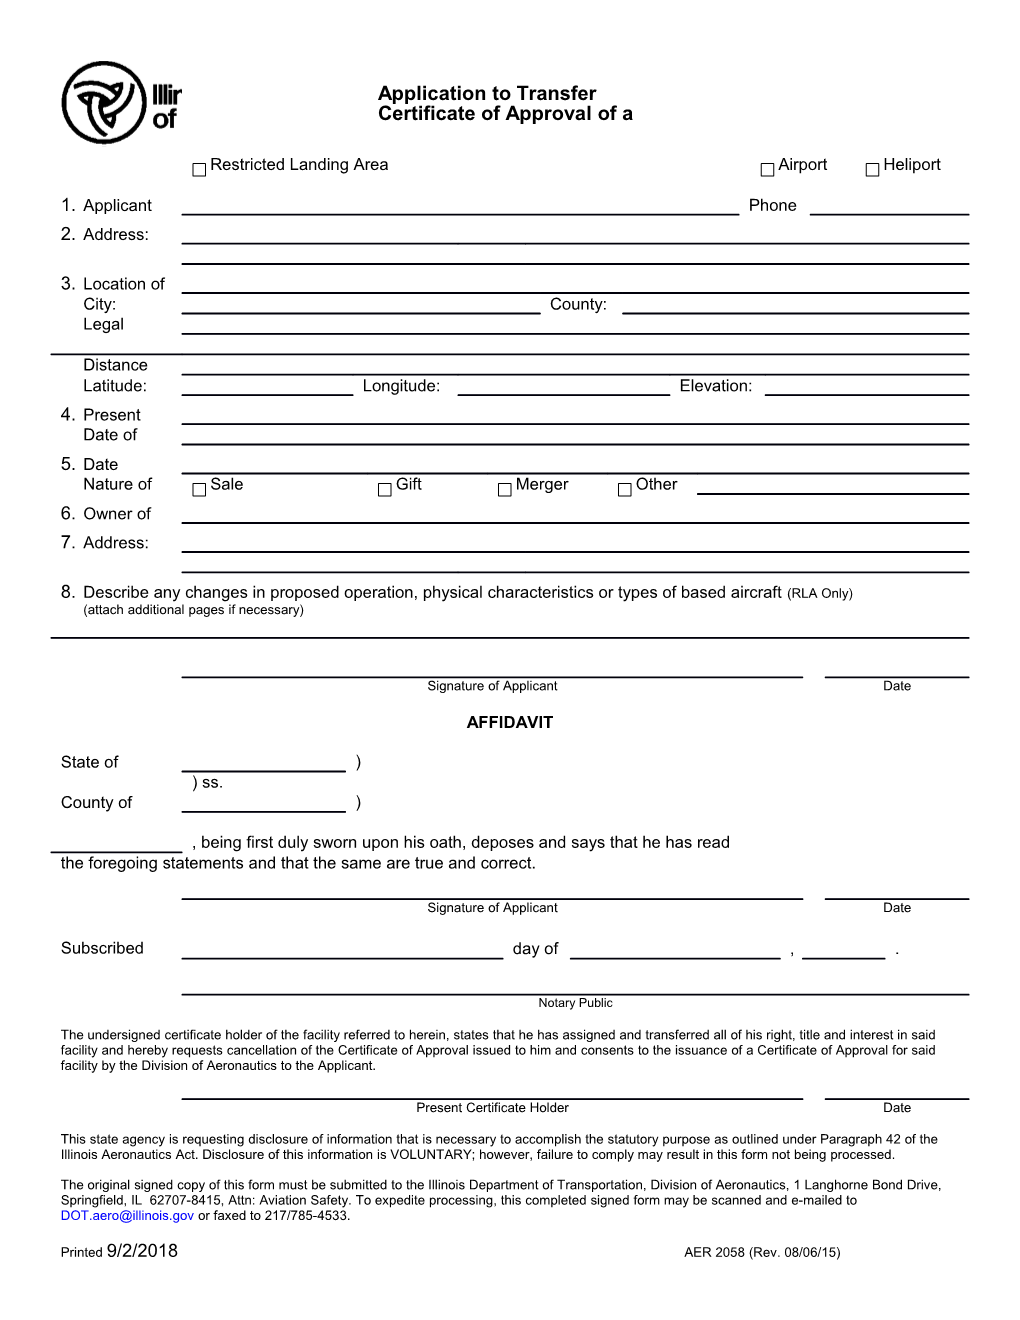 Application to Transfer Certificate of Aproval